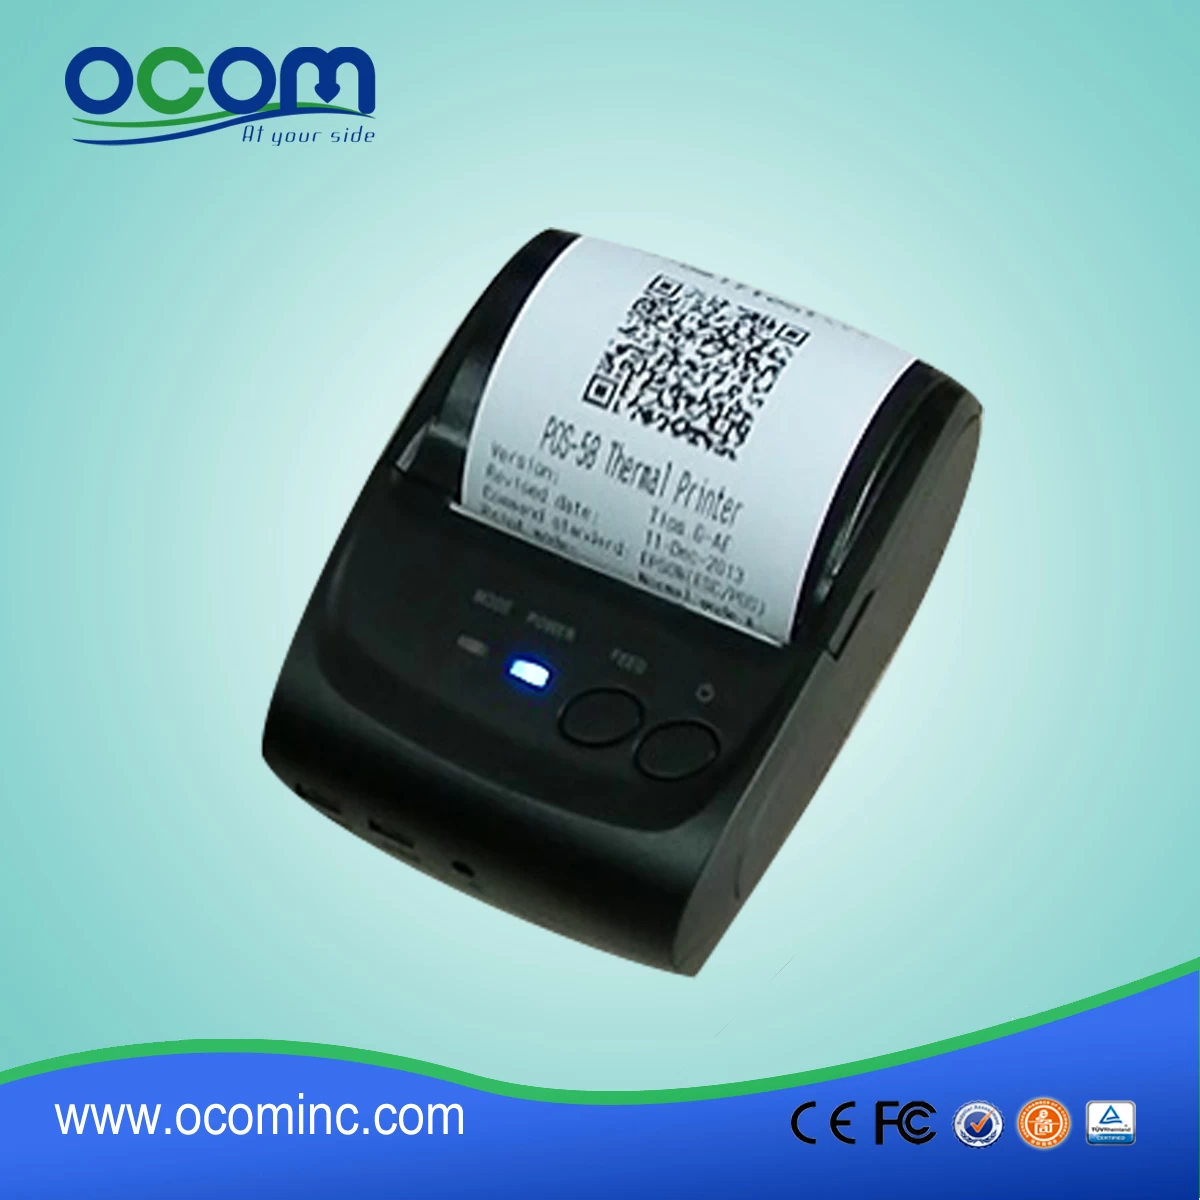 58mm Mini Bluetooth Thermal Receipt Printer for Android and iOS